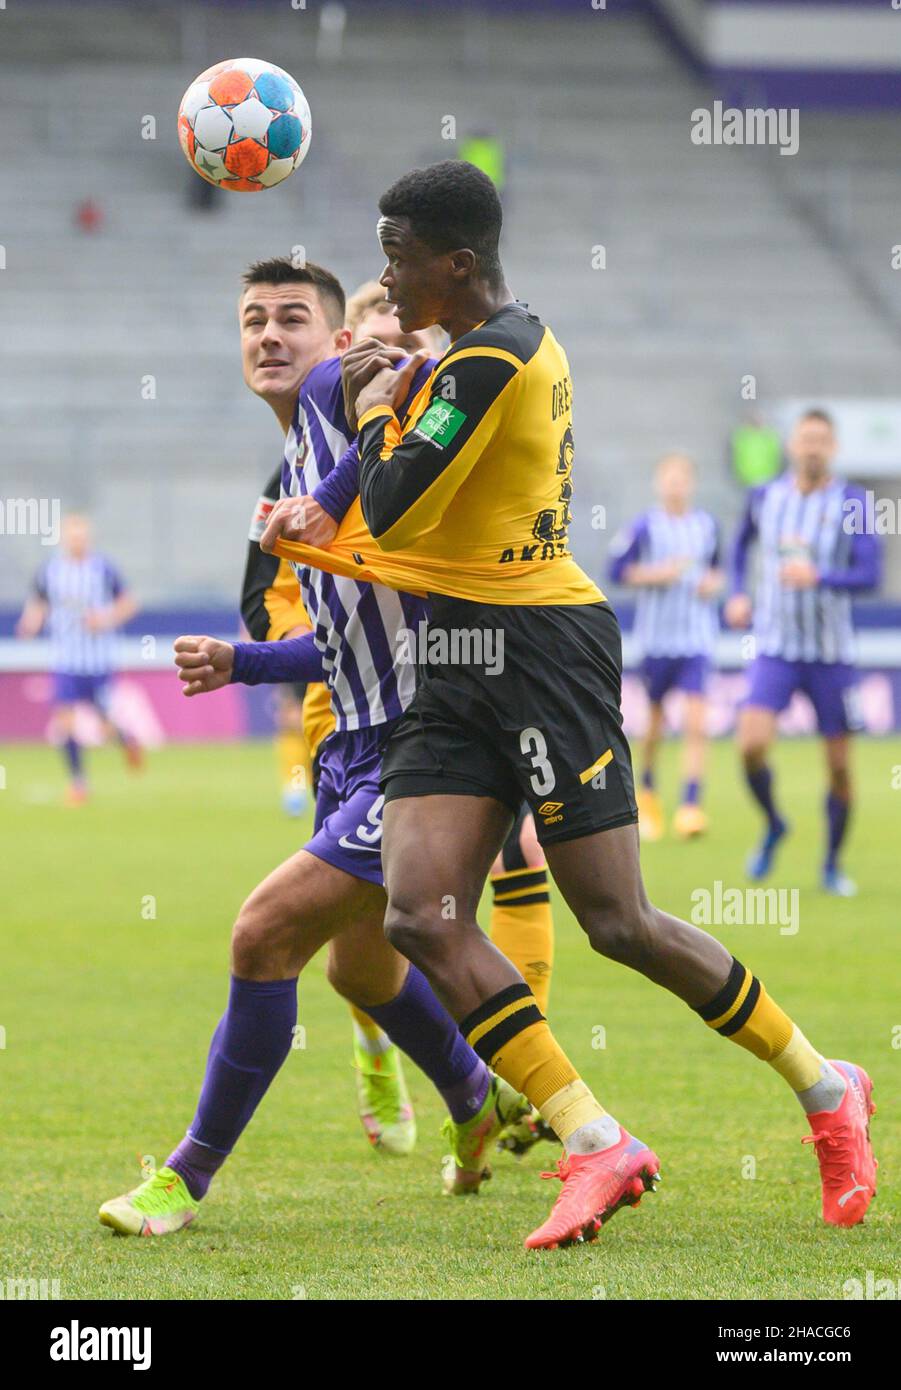 12 December 2021, Saxony, Aue: Soccer: 2. Bundesliga, FC Erzgebirge Aue - SG Dynamo Dresden, Matchday 17, Erzgebirgsstadion. Aue's Antonio Jonjic (l) against Dynamo's Michael Akoto. Photo: Robert Michael/dpa-Zentralbild/dpa - IMPORTANT NOTE: In accordance with the regulations of the DFL Deutsche Fußball Liga and/or the DFB Deutscher Fußball-Bund, it is prohibited to use or have used photographs taken in the stadium and/or of the match in the form of sequence pictures and/or video-like photo series. Stock Photo